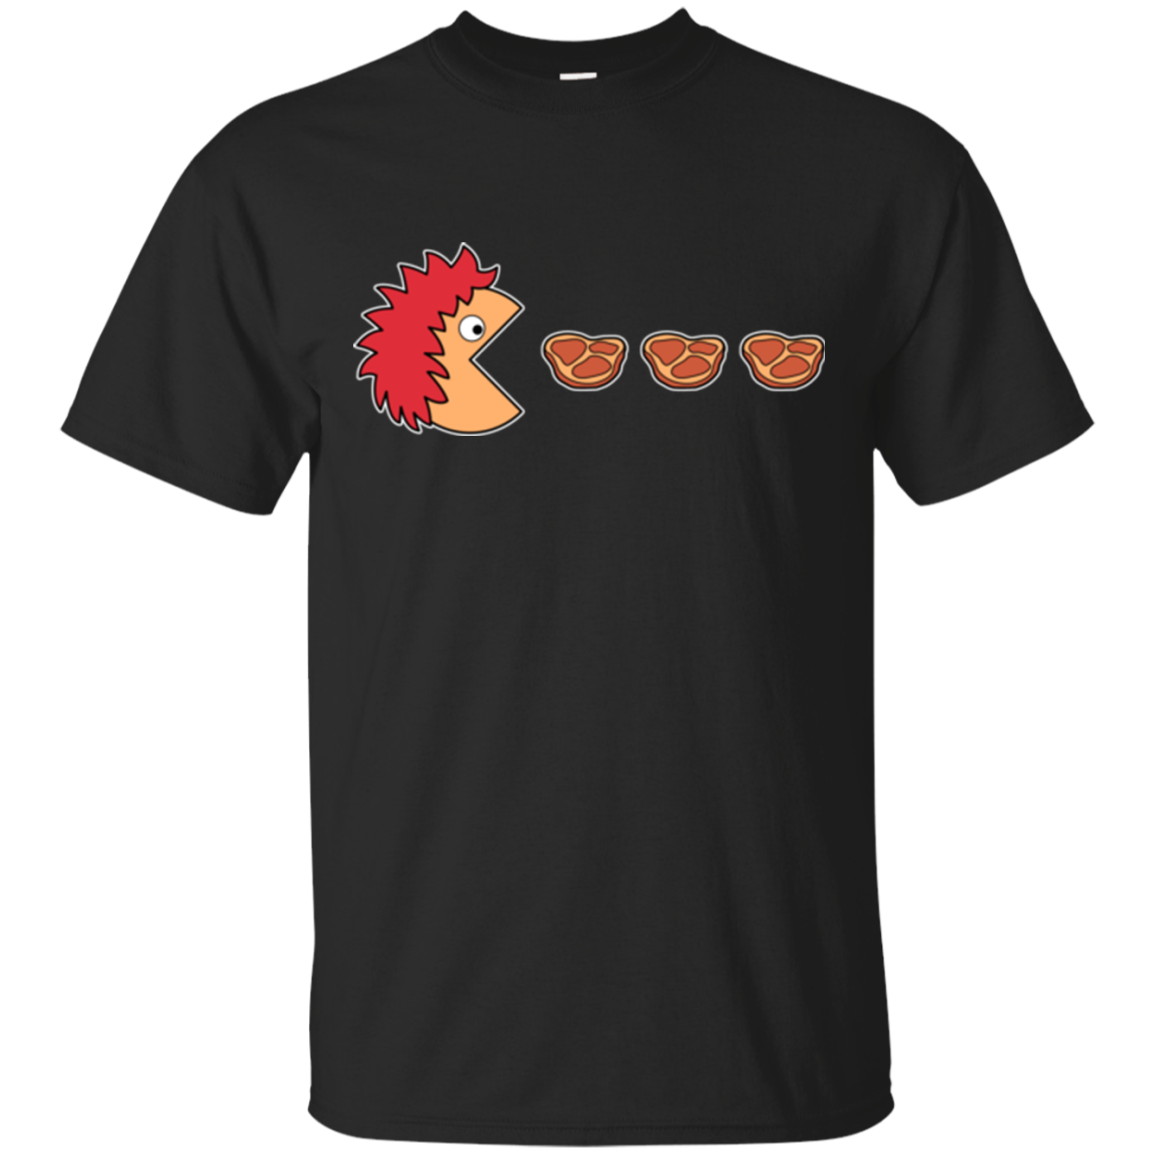 Hungry for Ham T-Shirt